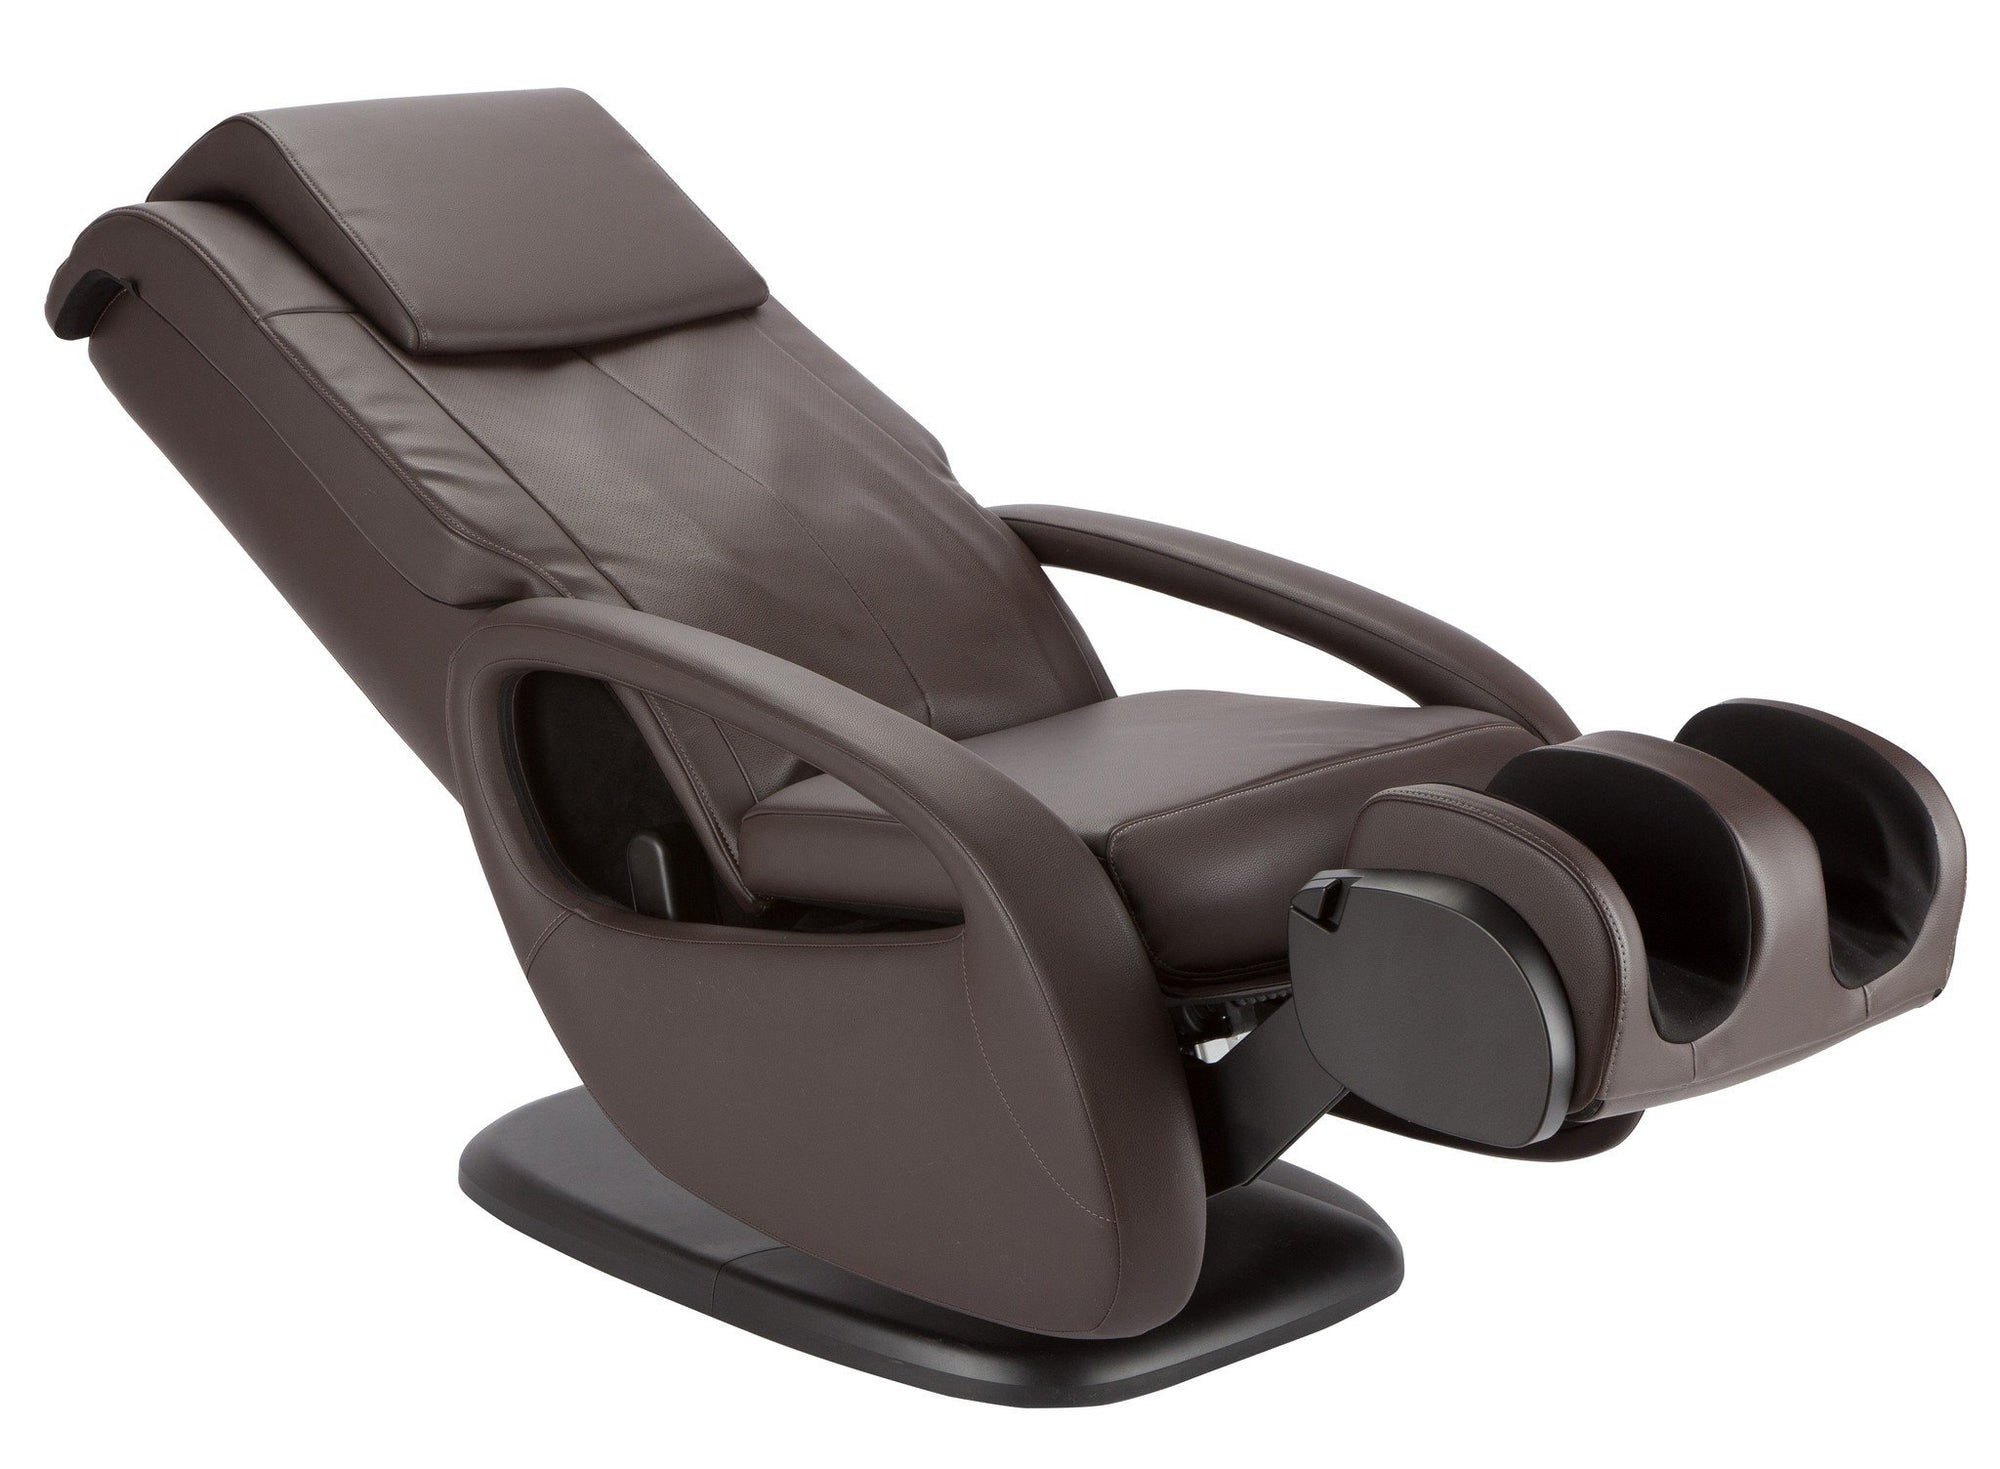 Human Touch Whole Body 71 Massage Chair Lowest Price Guarantee 